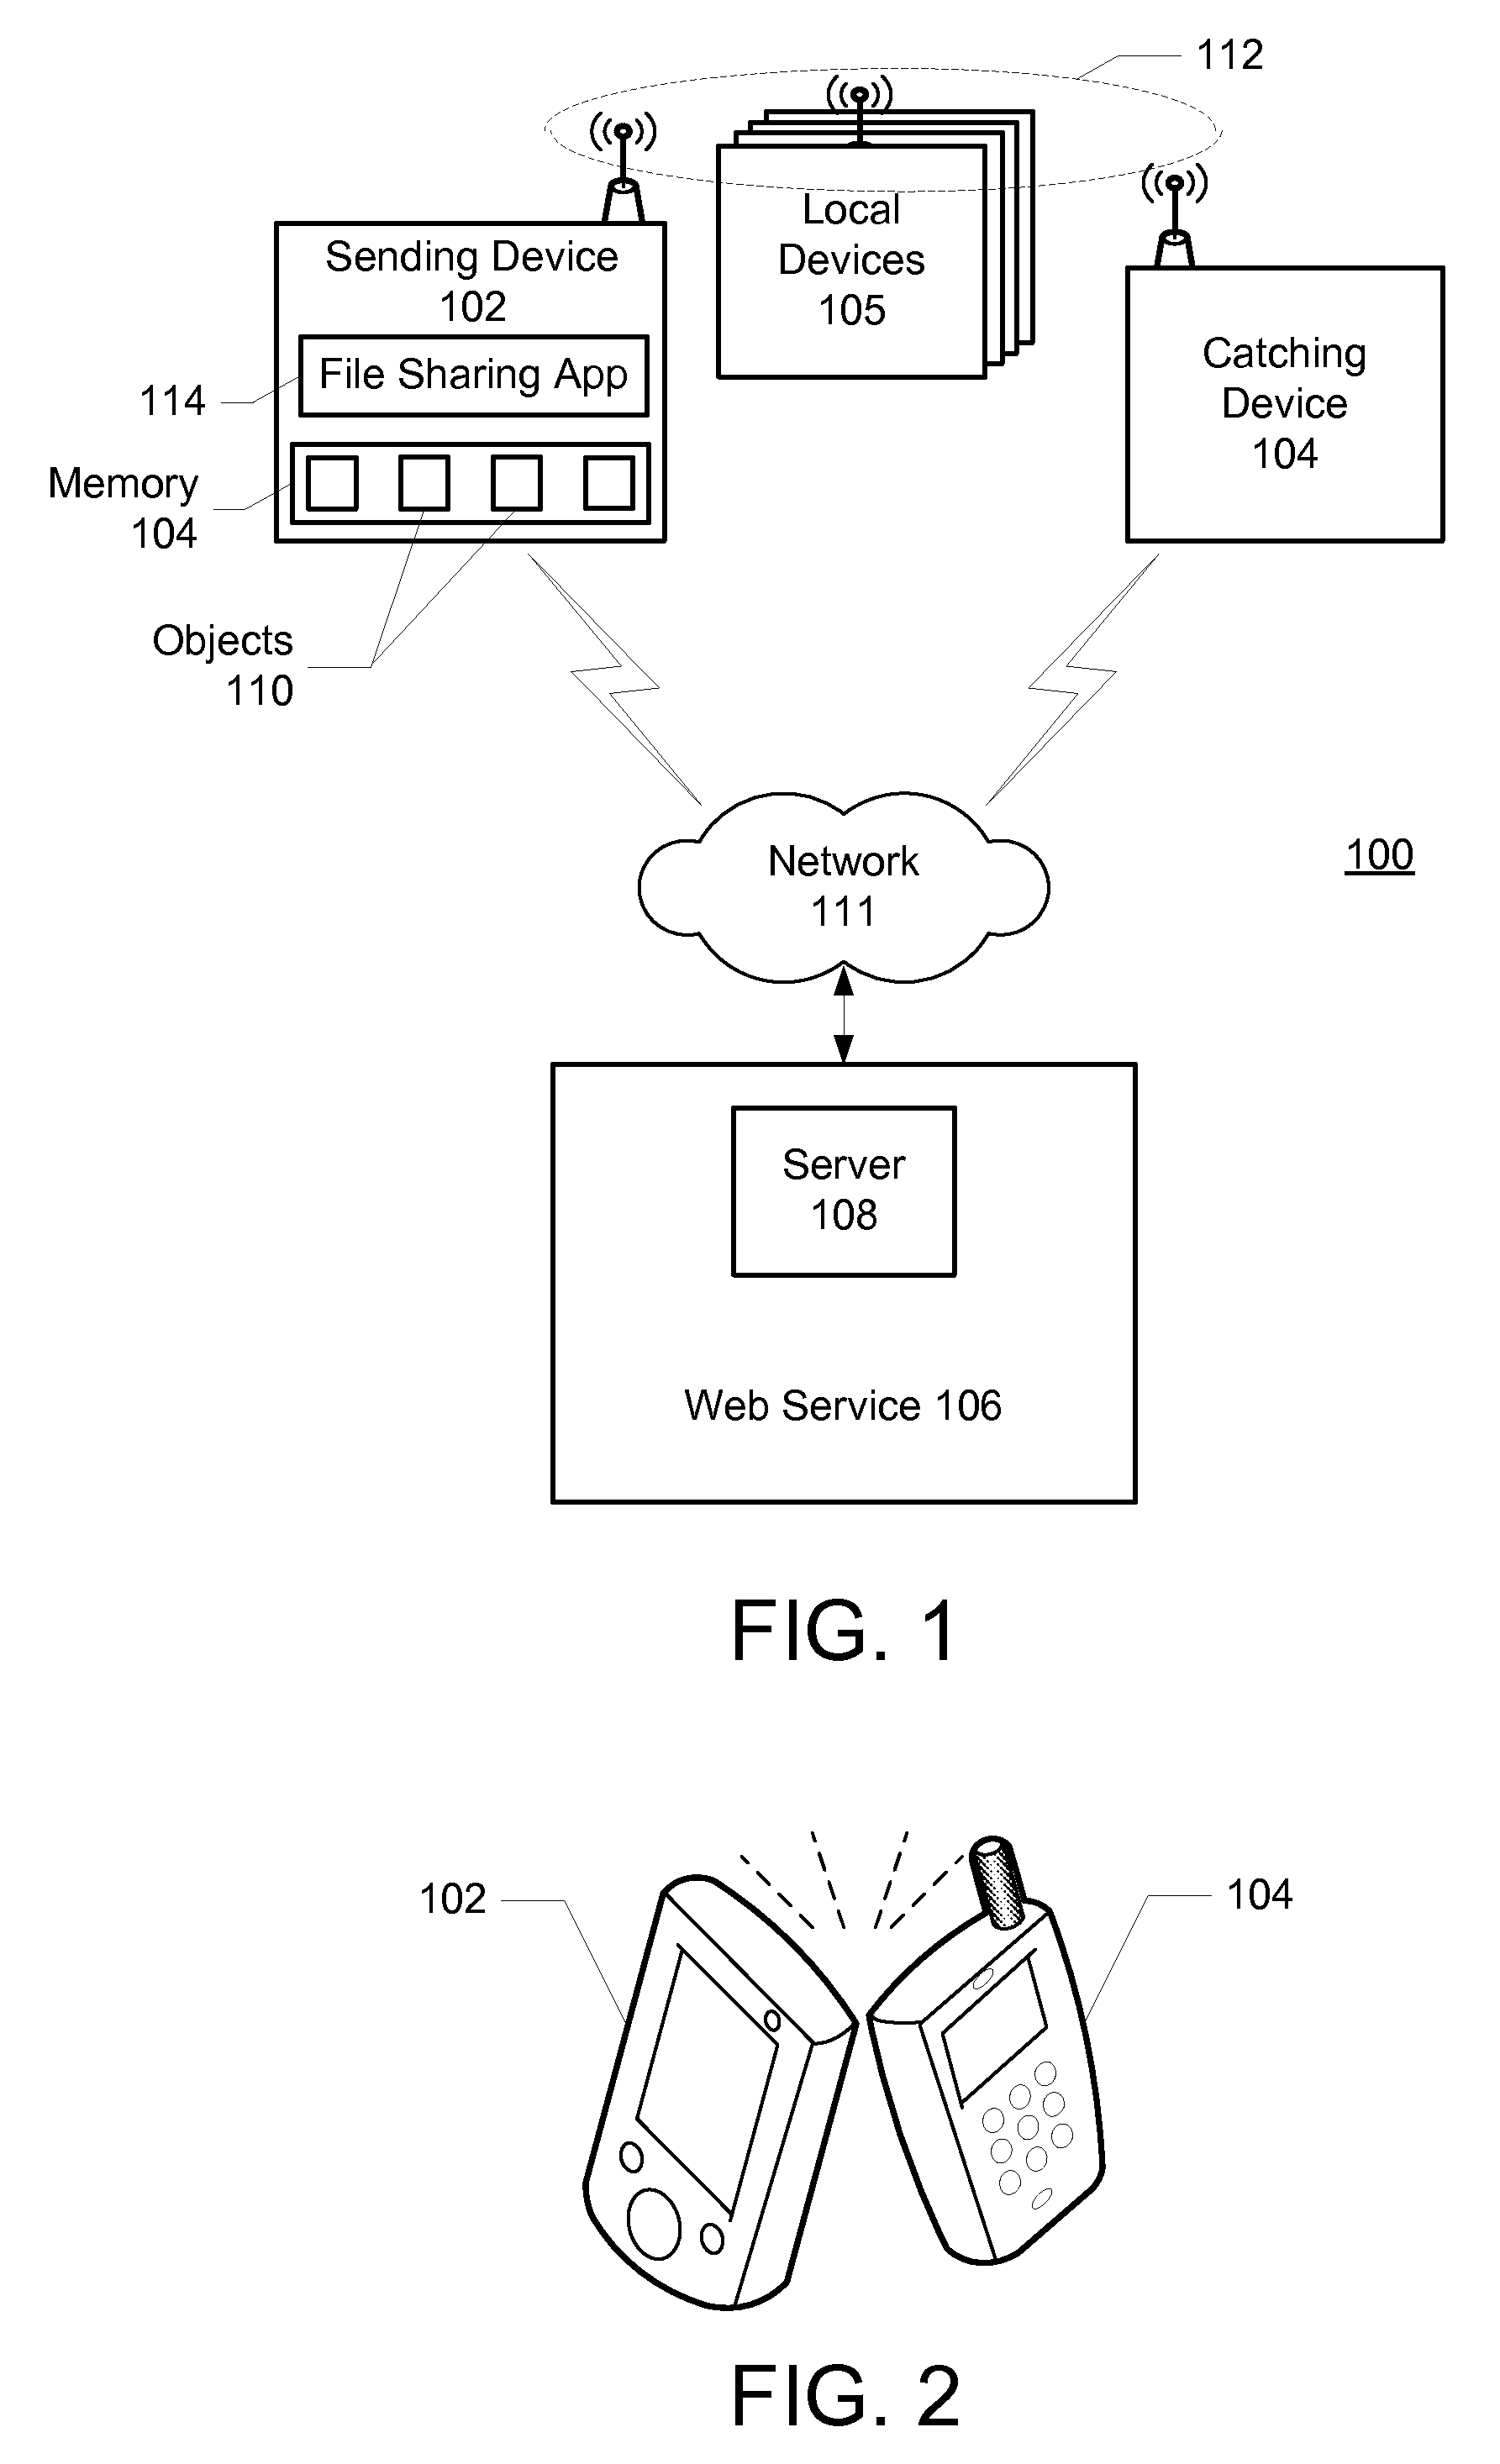 File sharing between devices